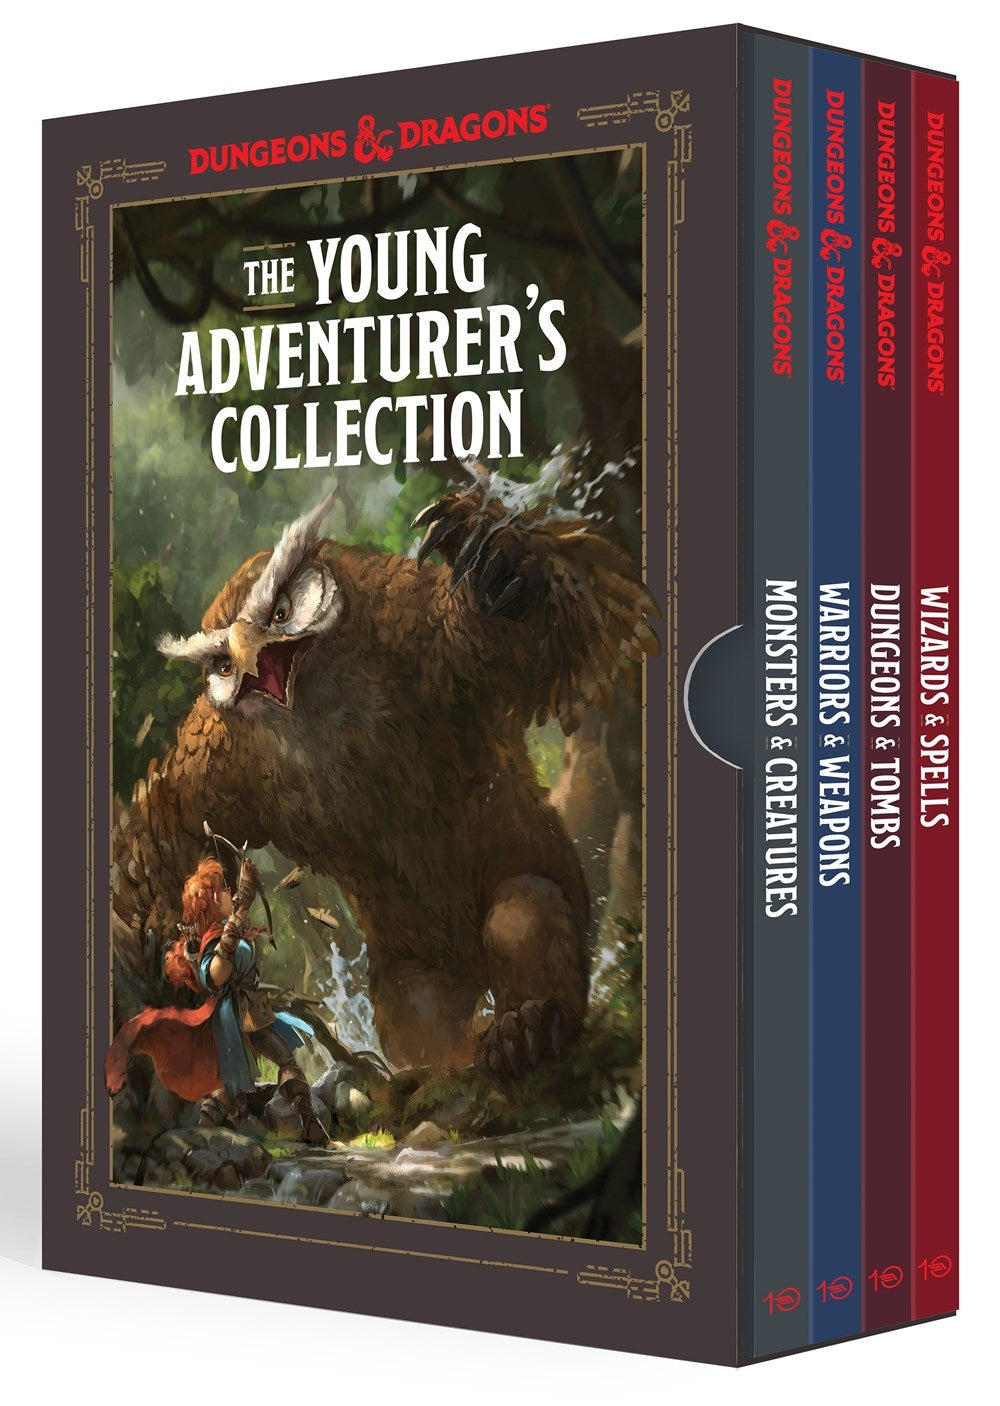 The Young Adventurer's Collection (Dungeons & Dragons 4-Book Boxed Set)